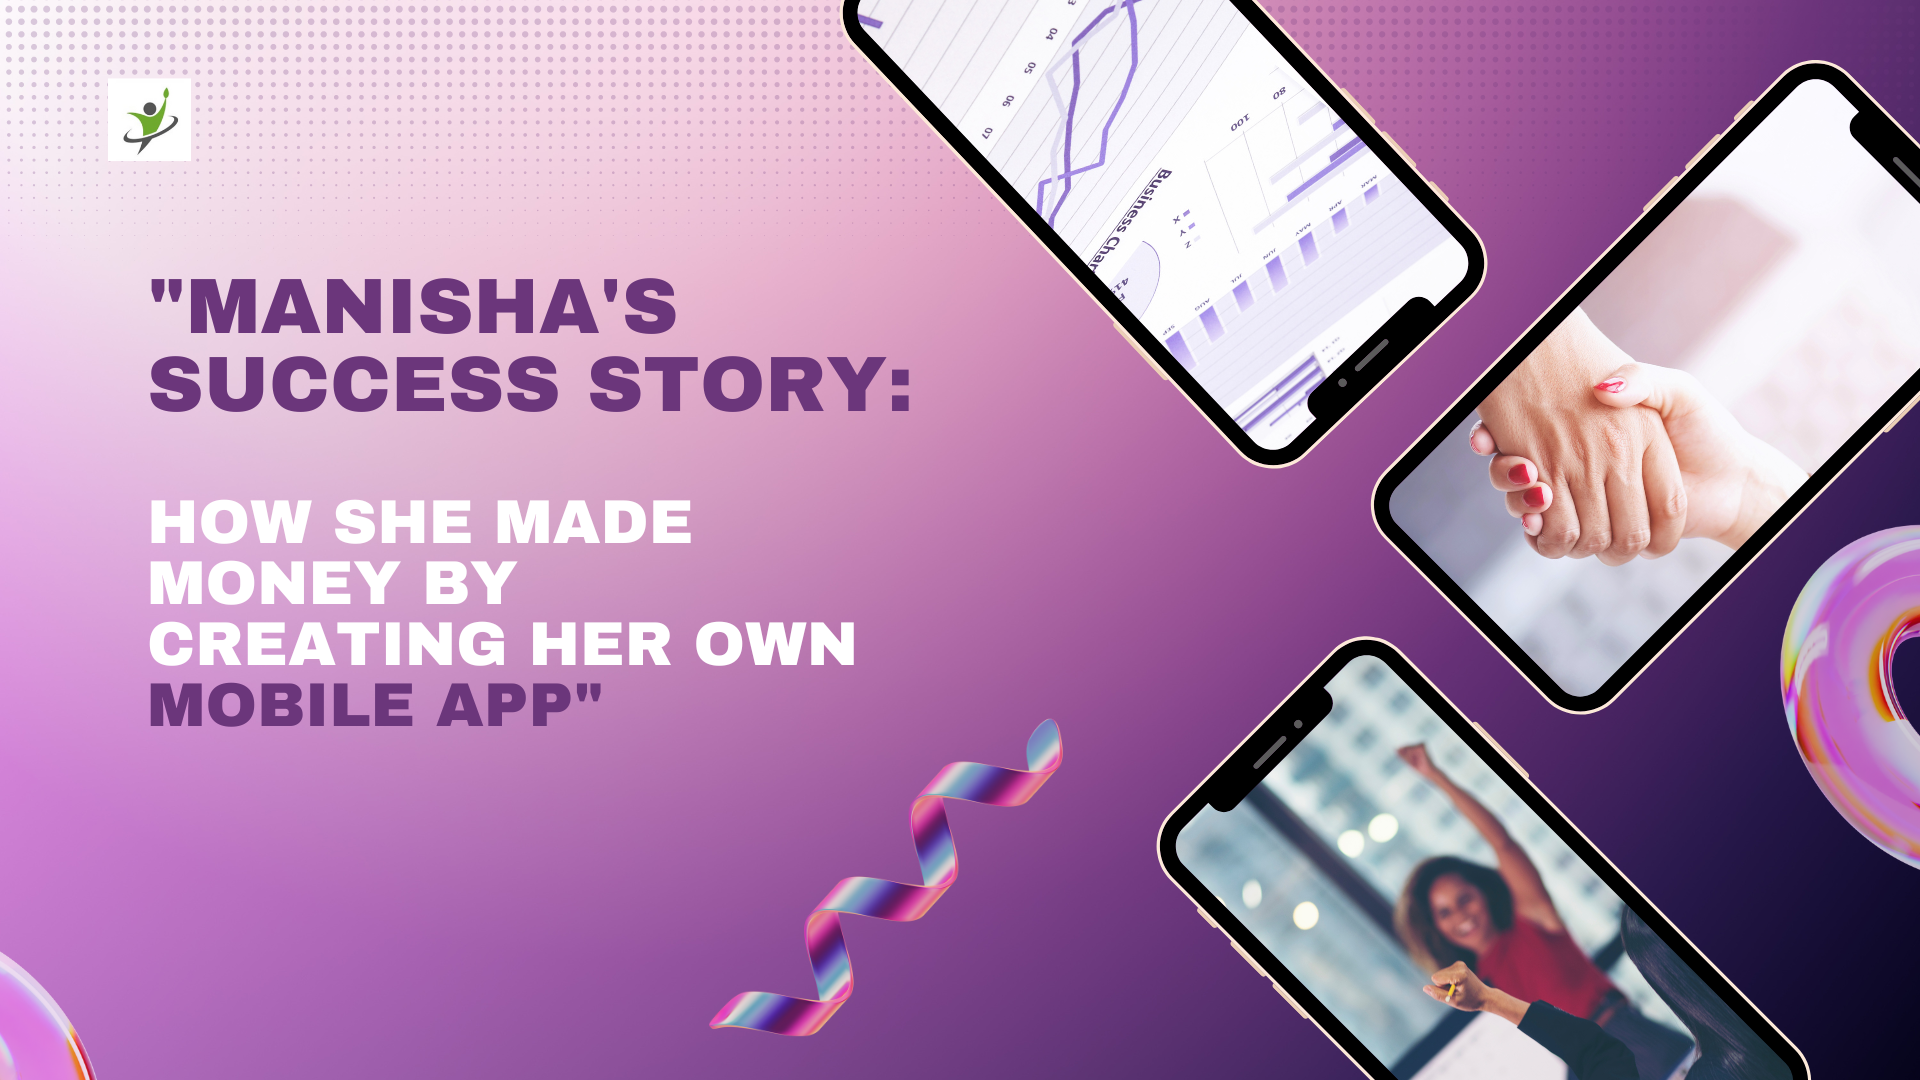 "Manisha's Success Story: How She Made Money by Creating Her Own Mobile App"